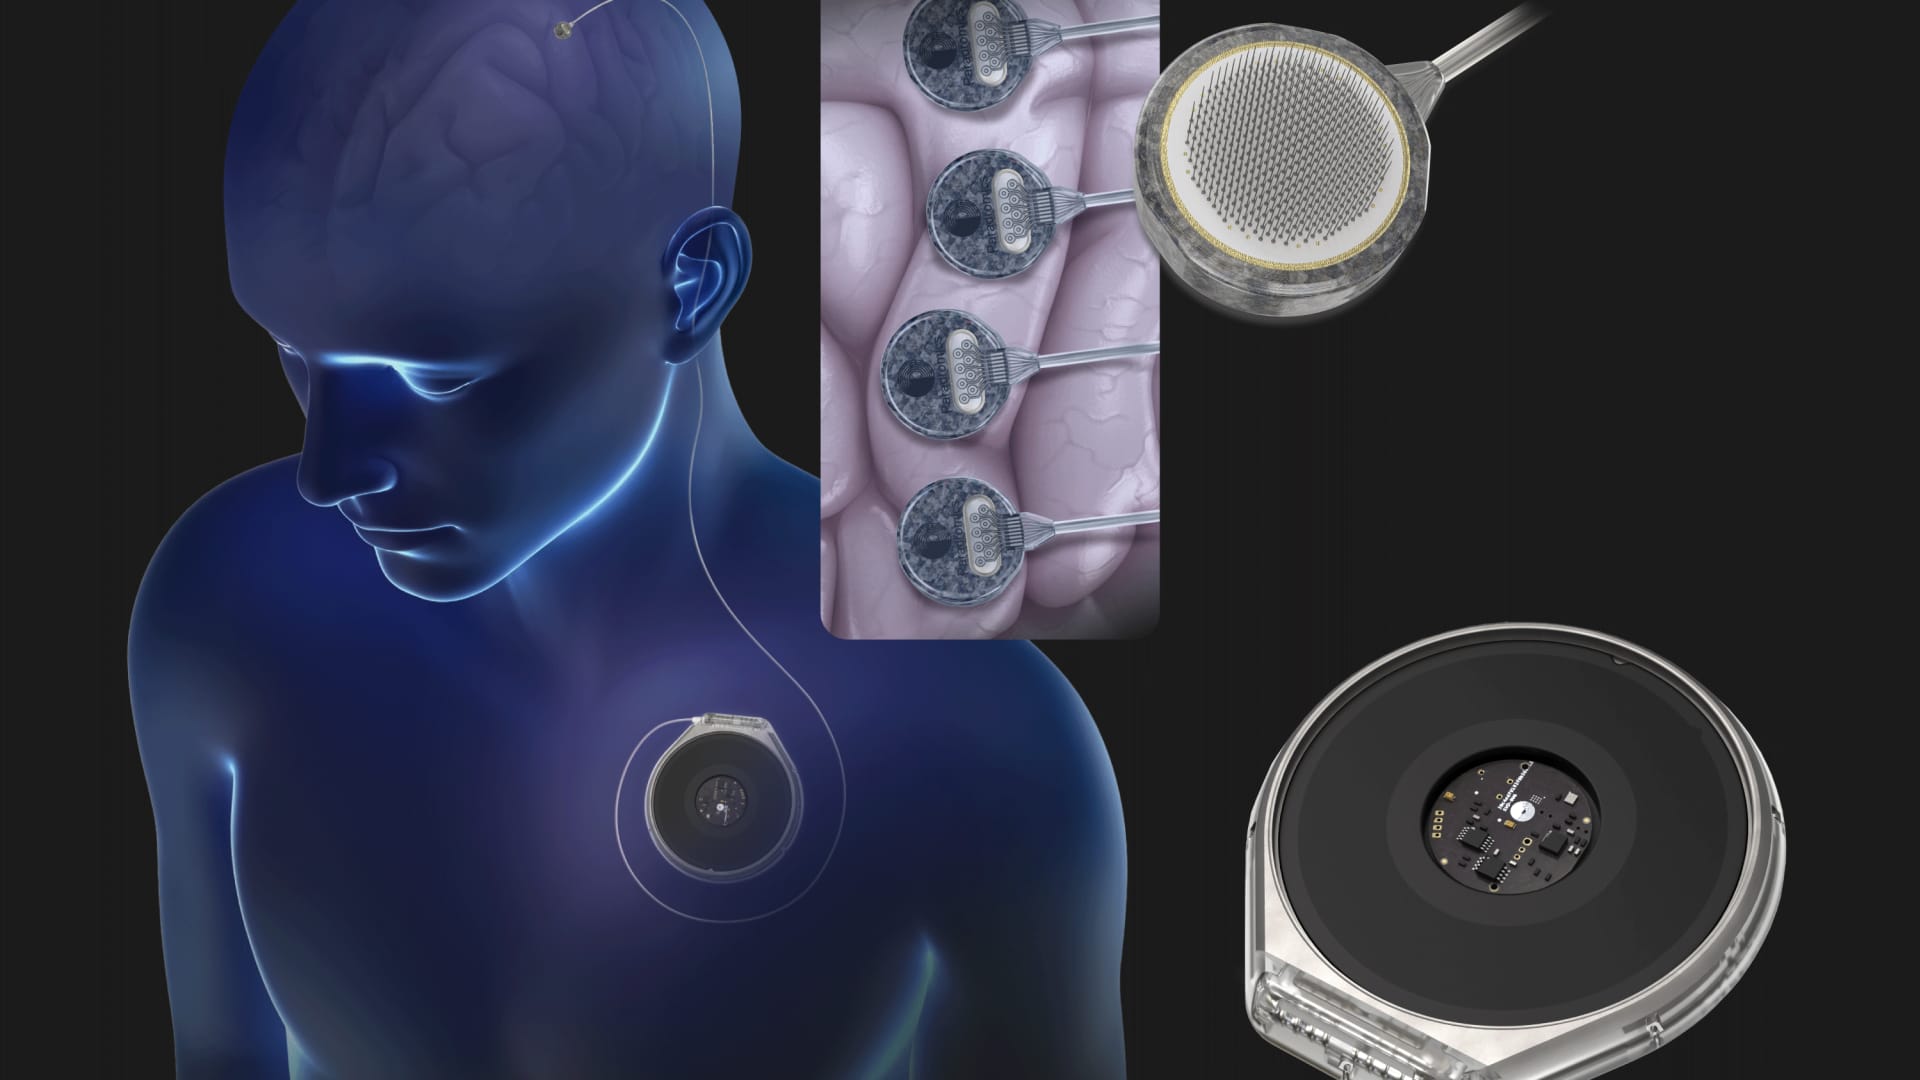 Paradromics gears up to test its brain implant on humans